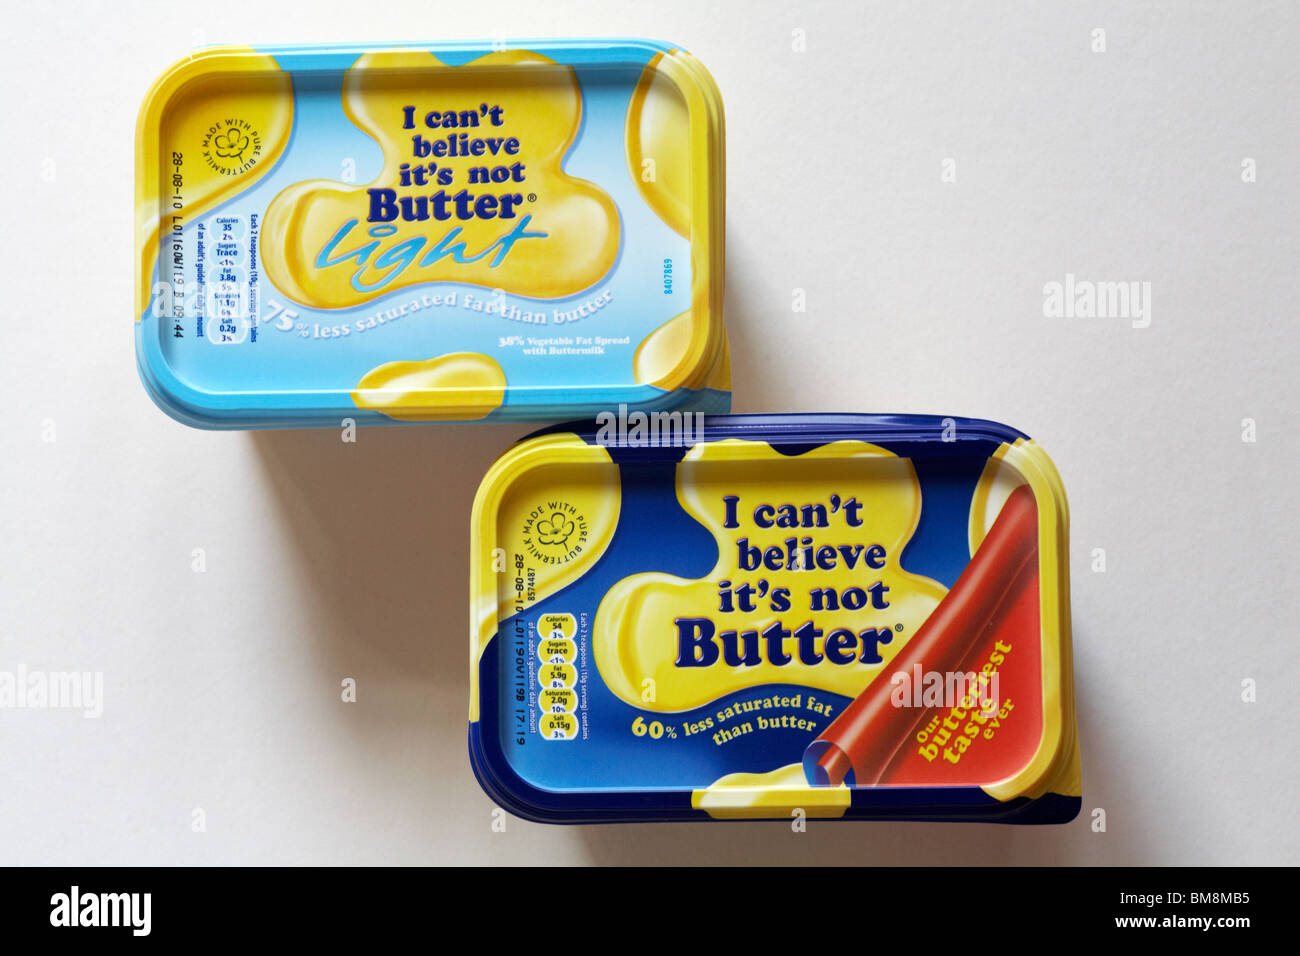 I can't believe it's not butter - two tubs, one Light isolated on white background Stock Photo